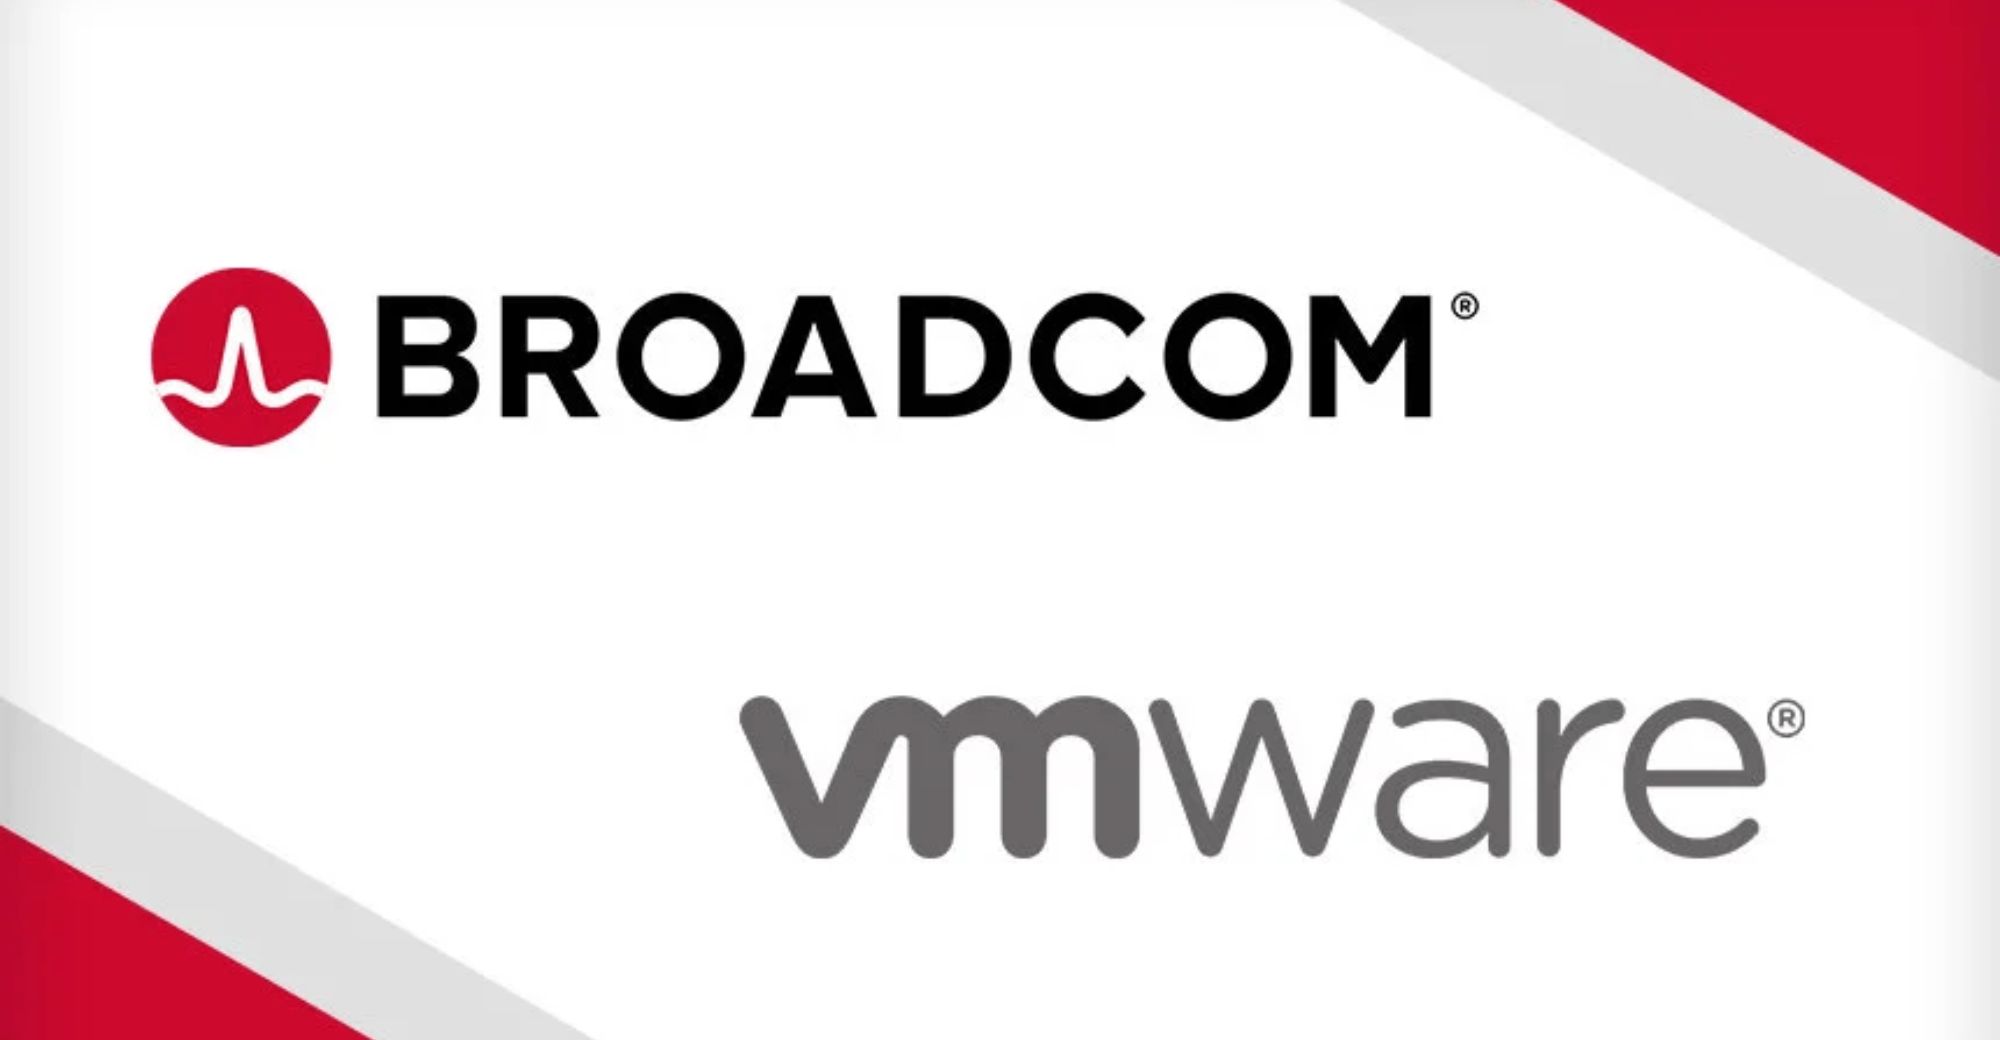 VMware Is Acquired by Broadcom, Employees in China May Receive New Contracts or Severance Pay